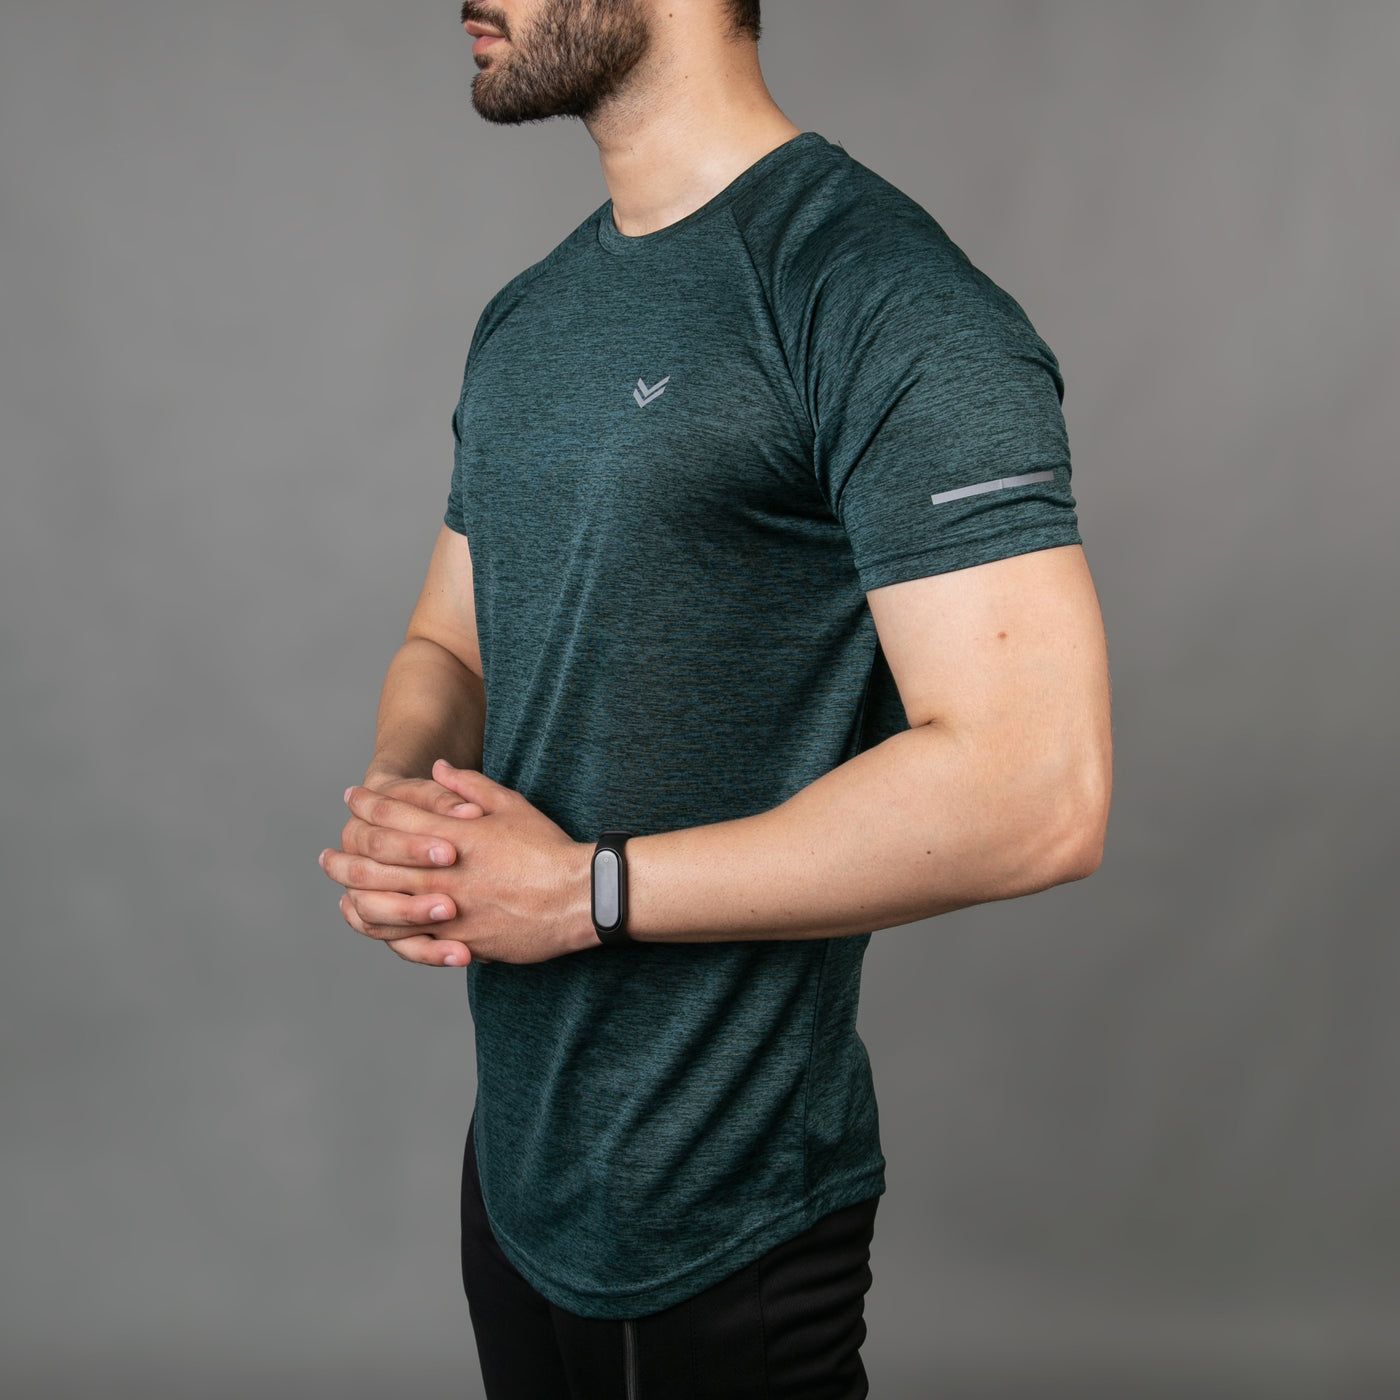 Textured Green Quick Dry T-Shirt With Reflective Detailing